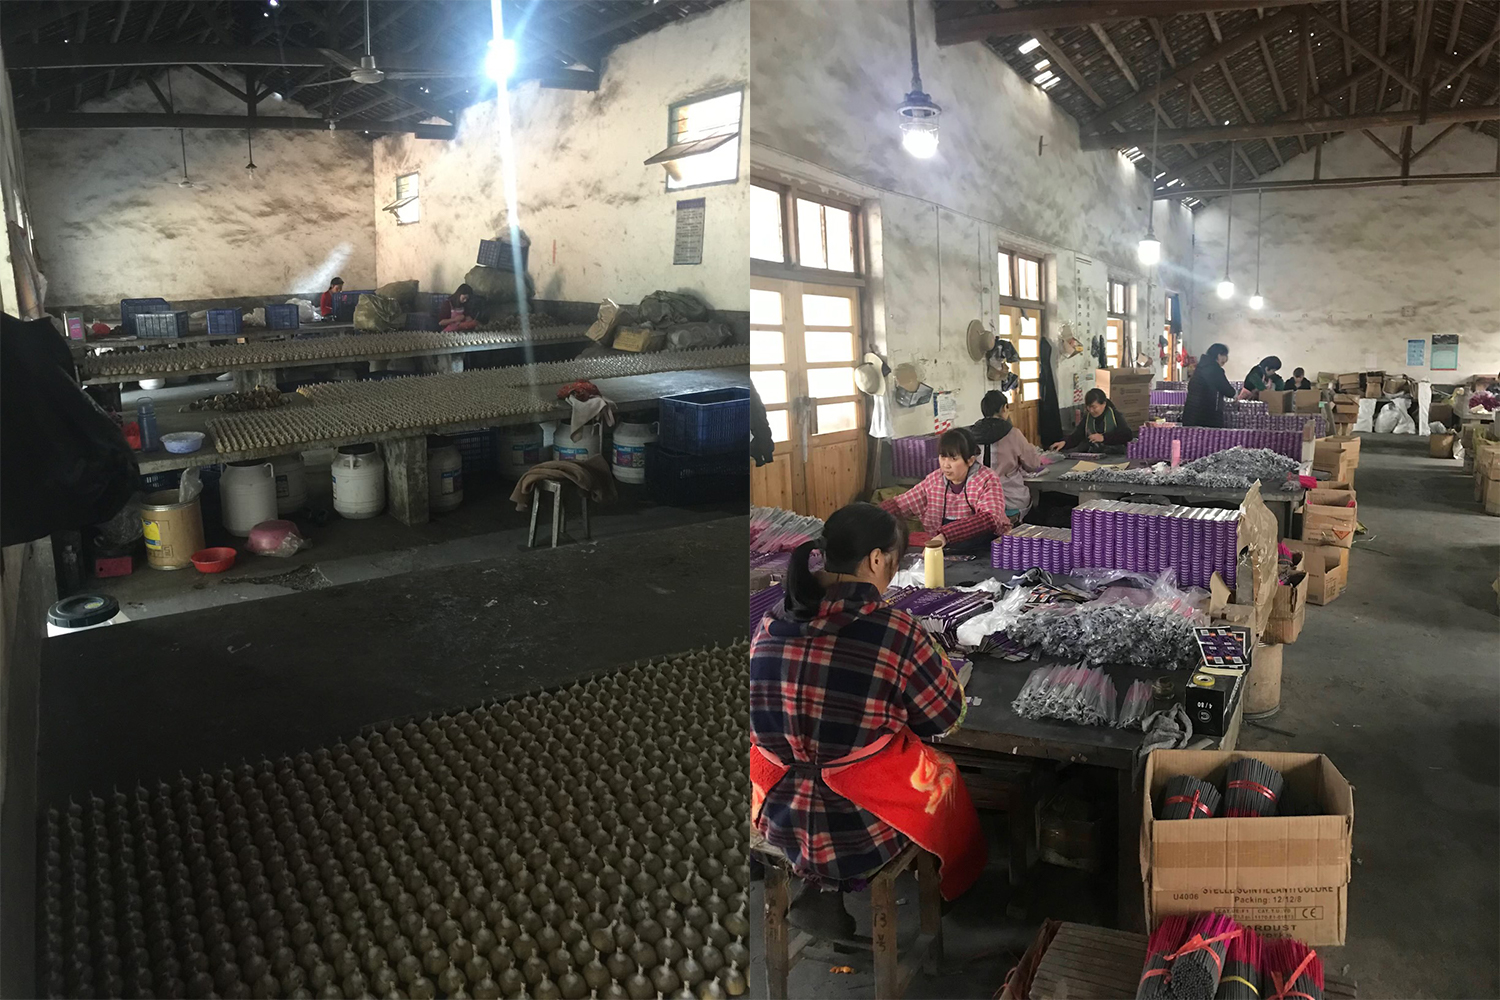 Chinese workers making fireworks for Phantom Fireworks by hand in rural China